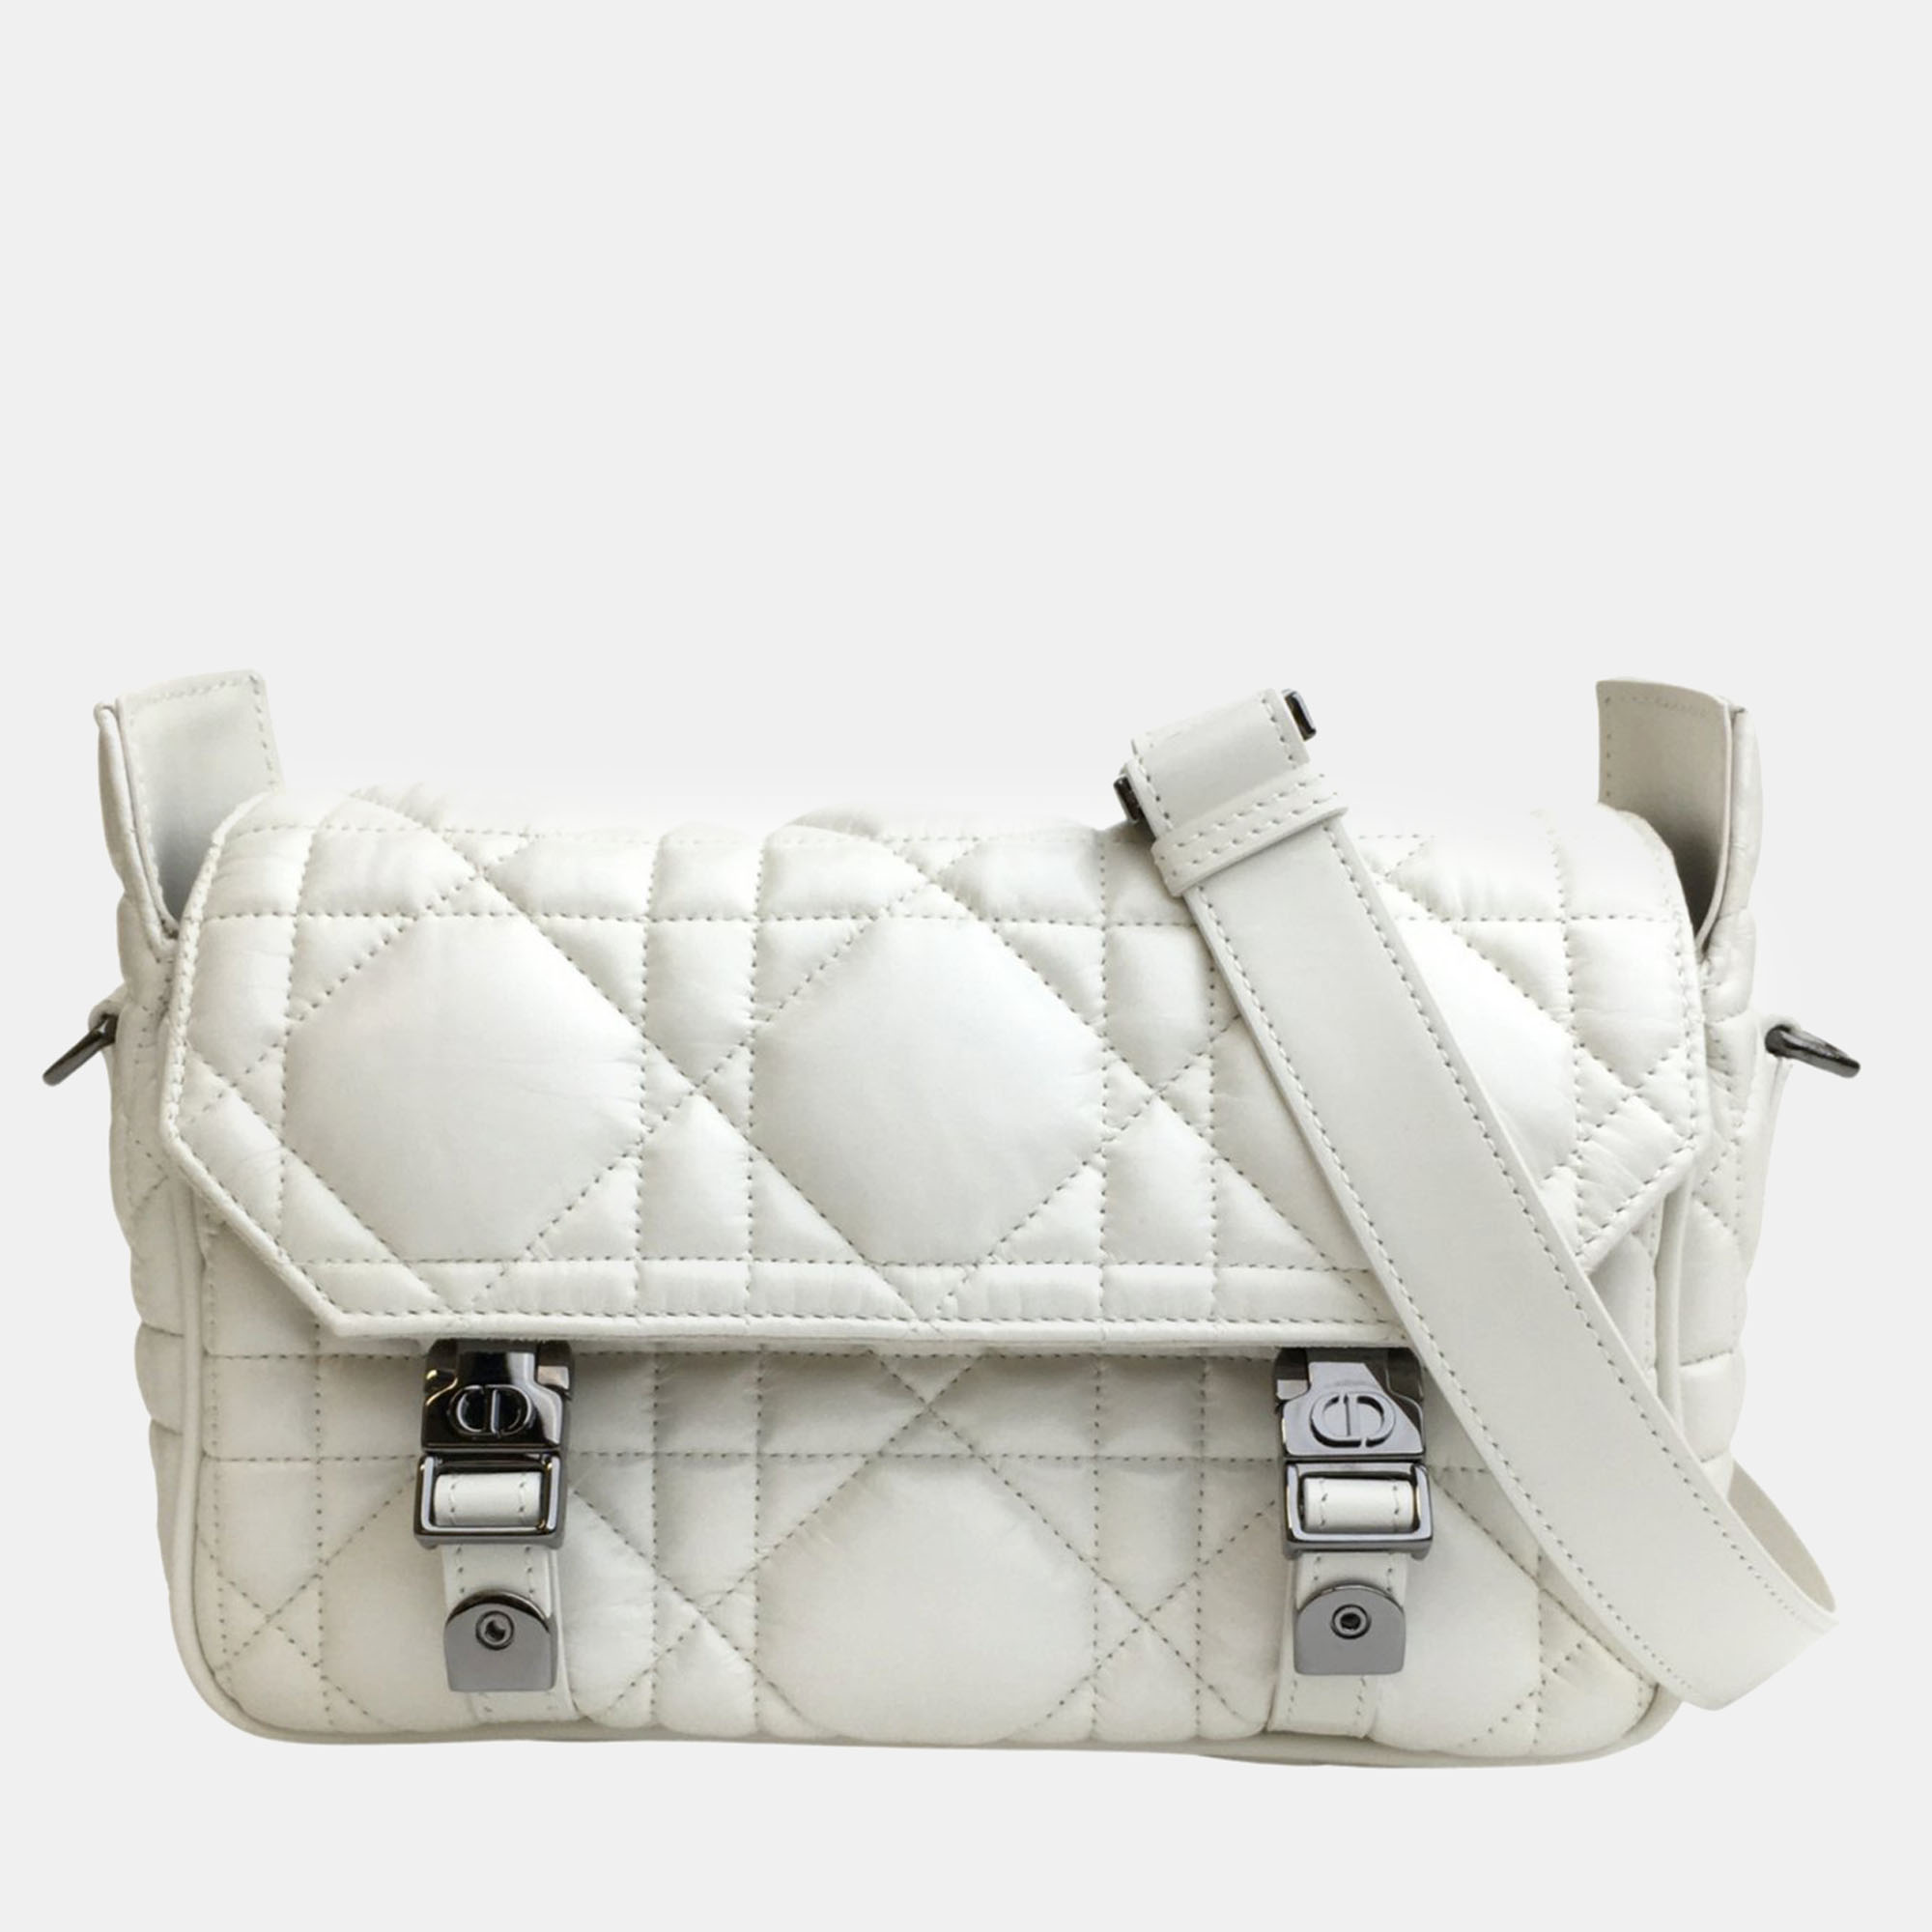 Dior white leather small diorcamp shoulder bag